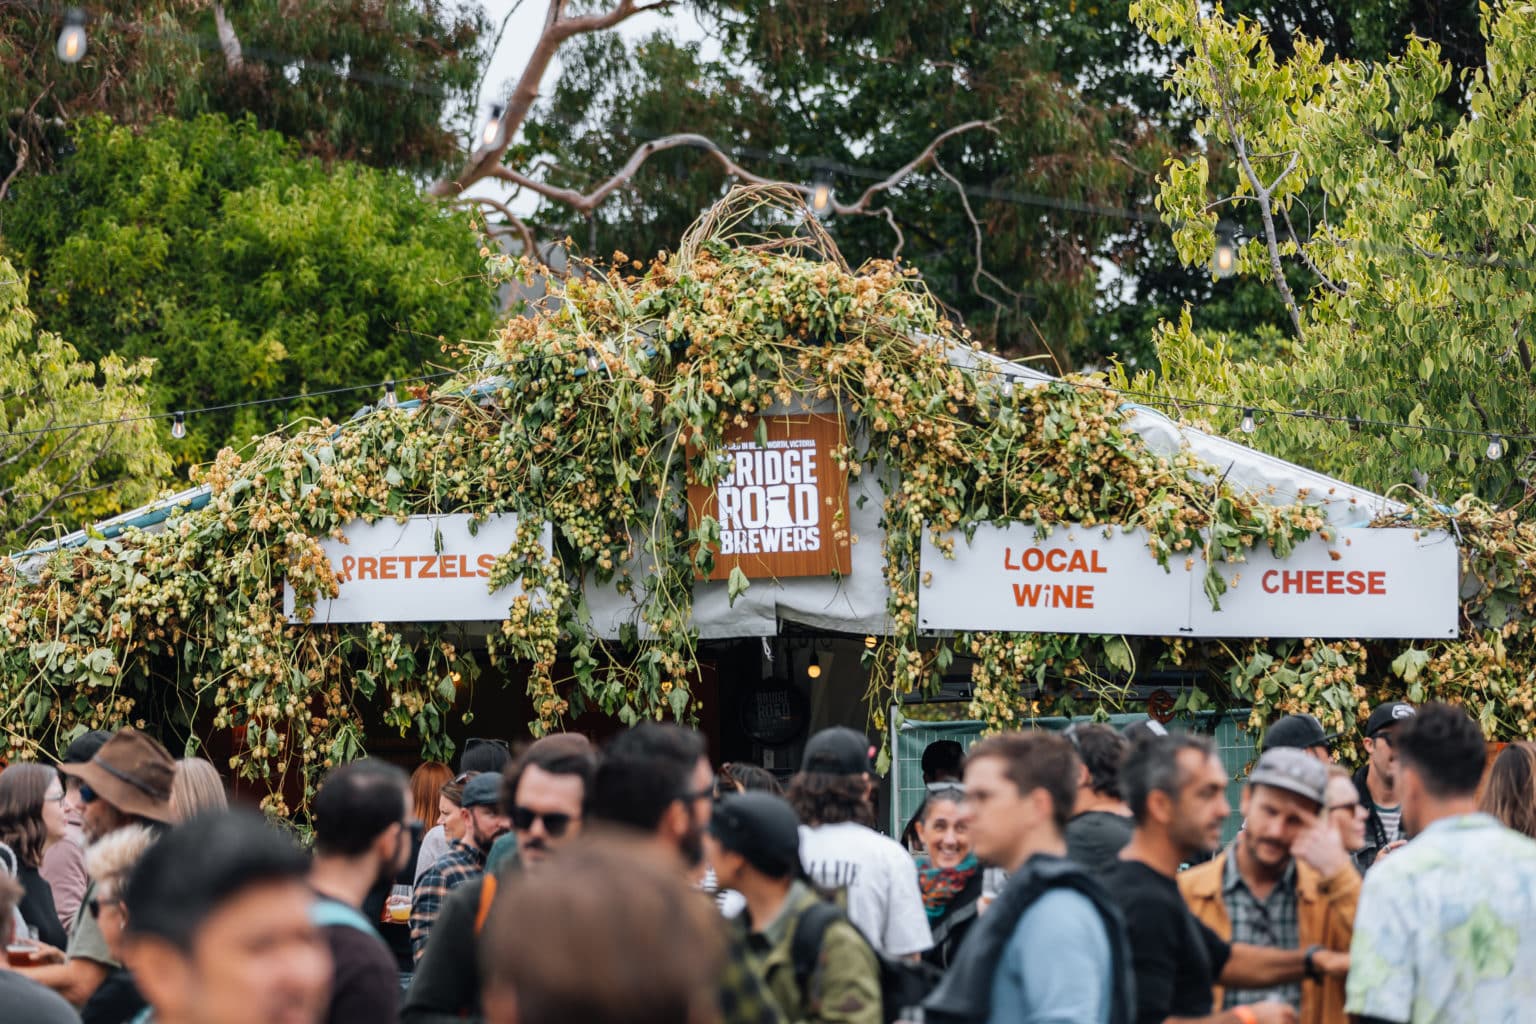 The Bridge Road Brewers marquee at the High Country Hop festival, 2022